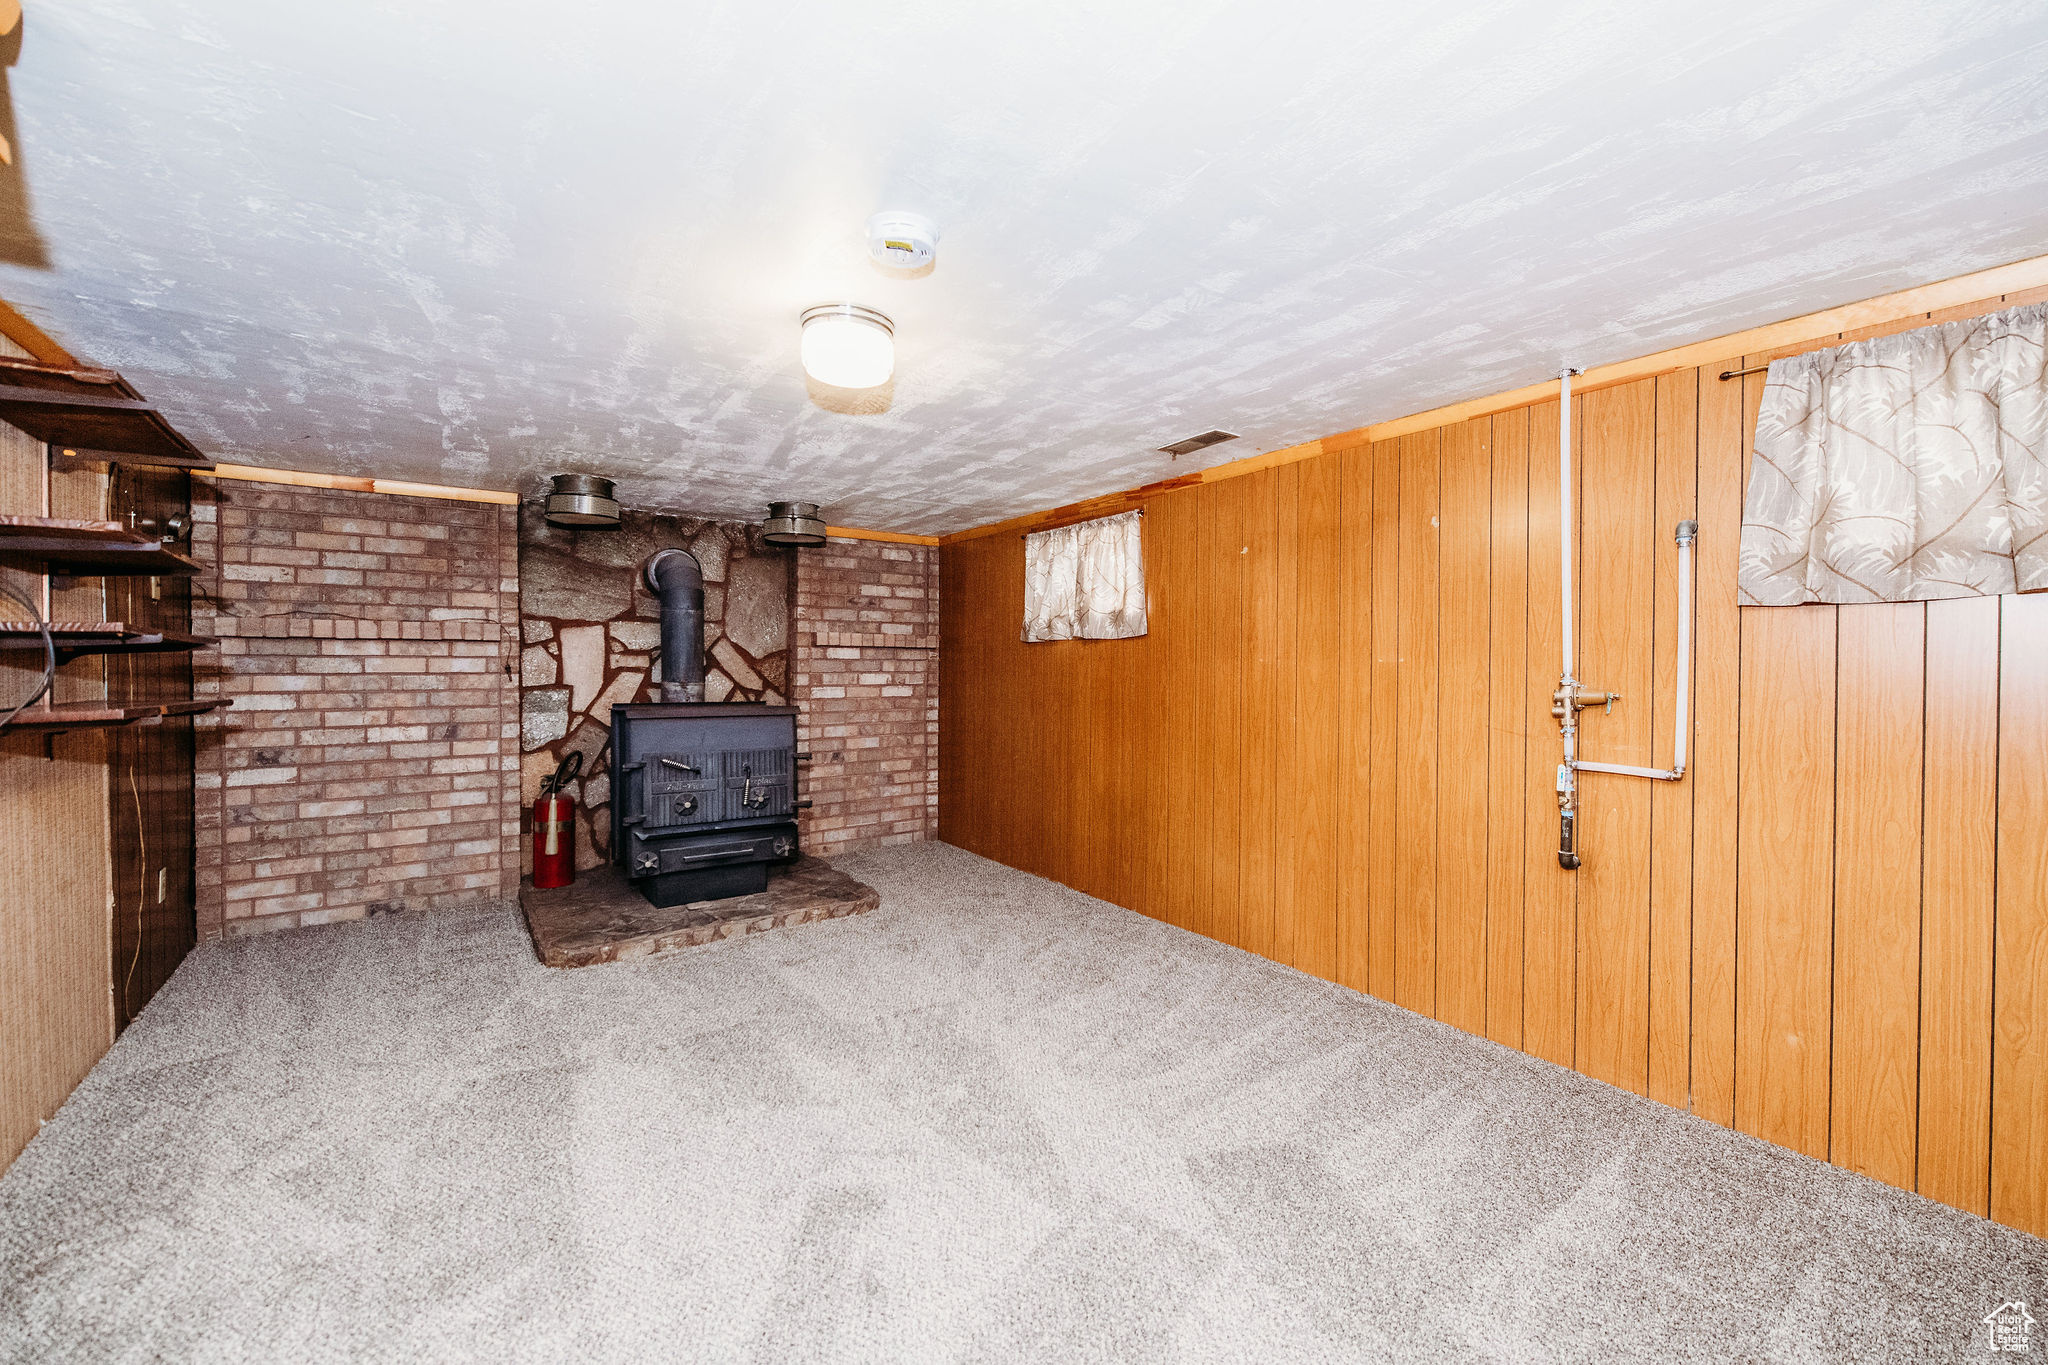 Basement with carpet floors, wood walls, and a wood stove